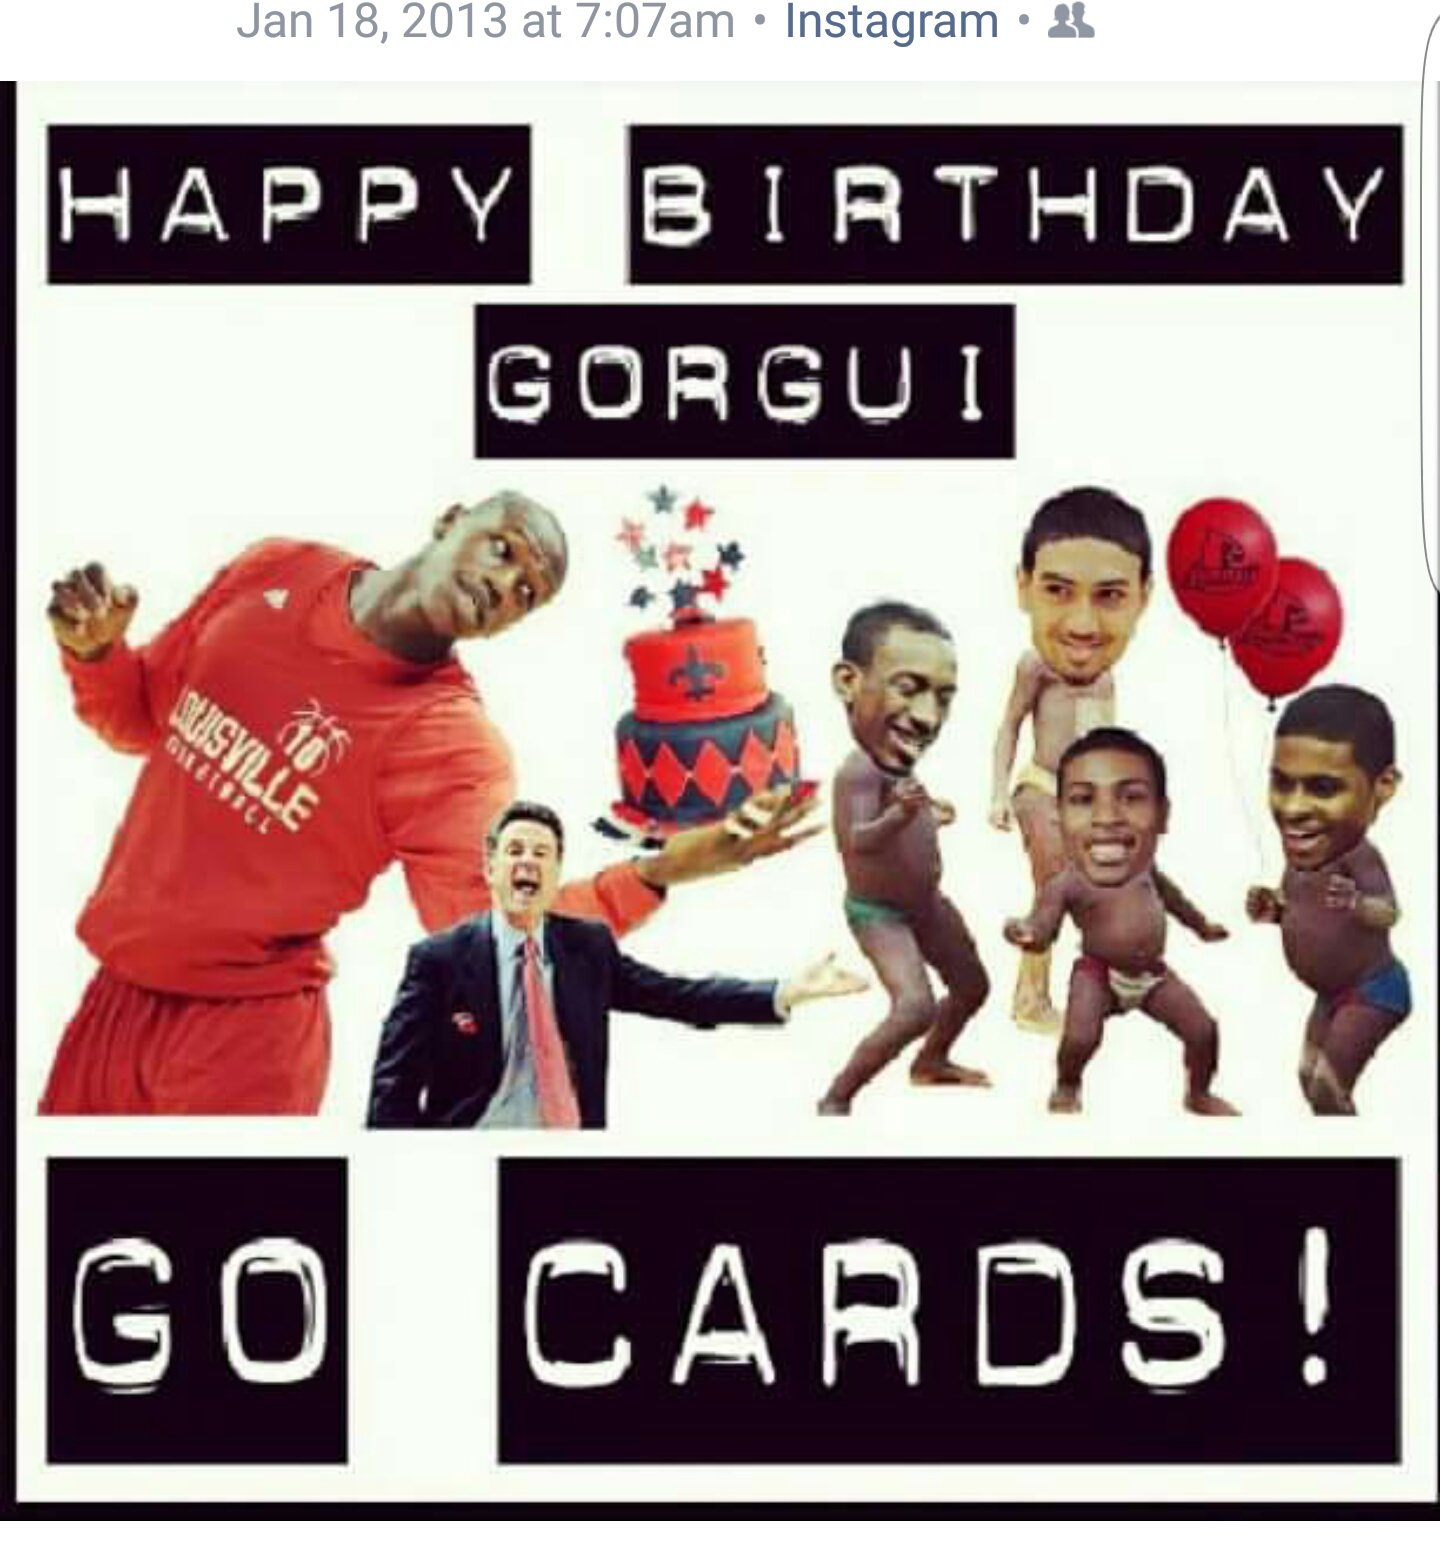 Going through my Facebook memories and seen this. Happy Birthday Gorgui Dieng 